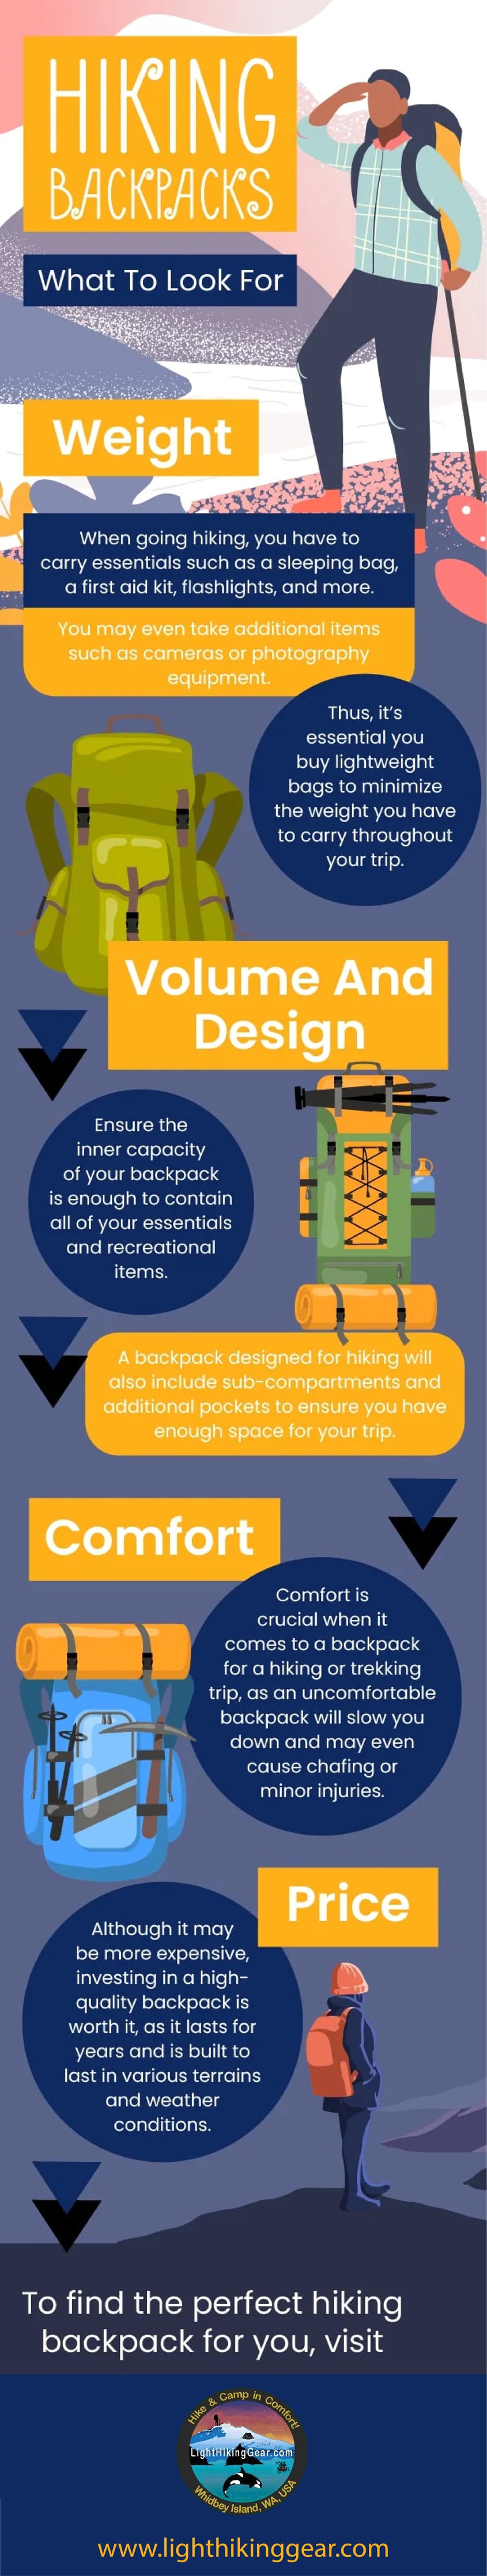 Hiking Backpacks - What To Look For Weight | Infographic